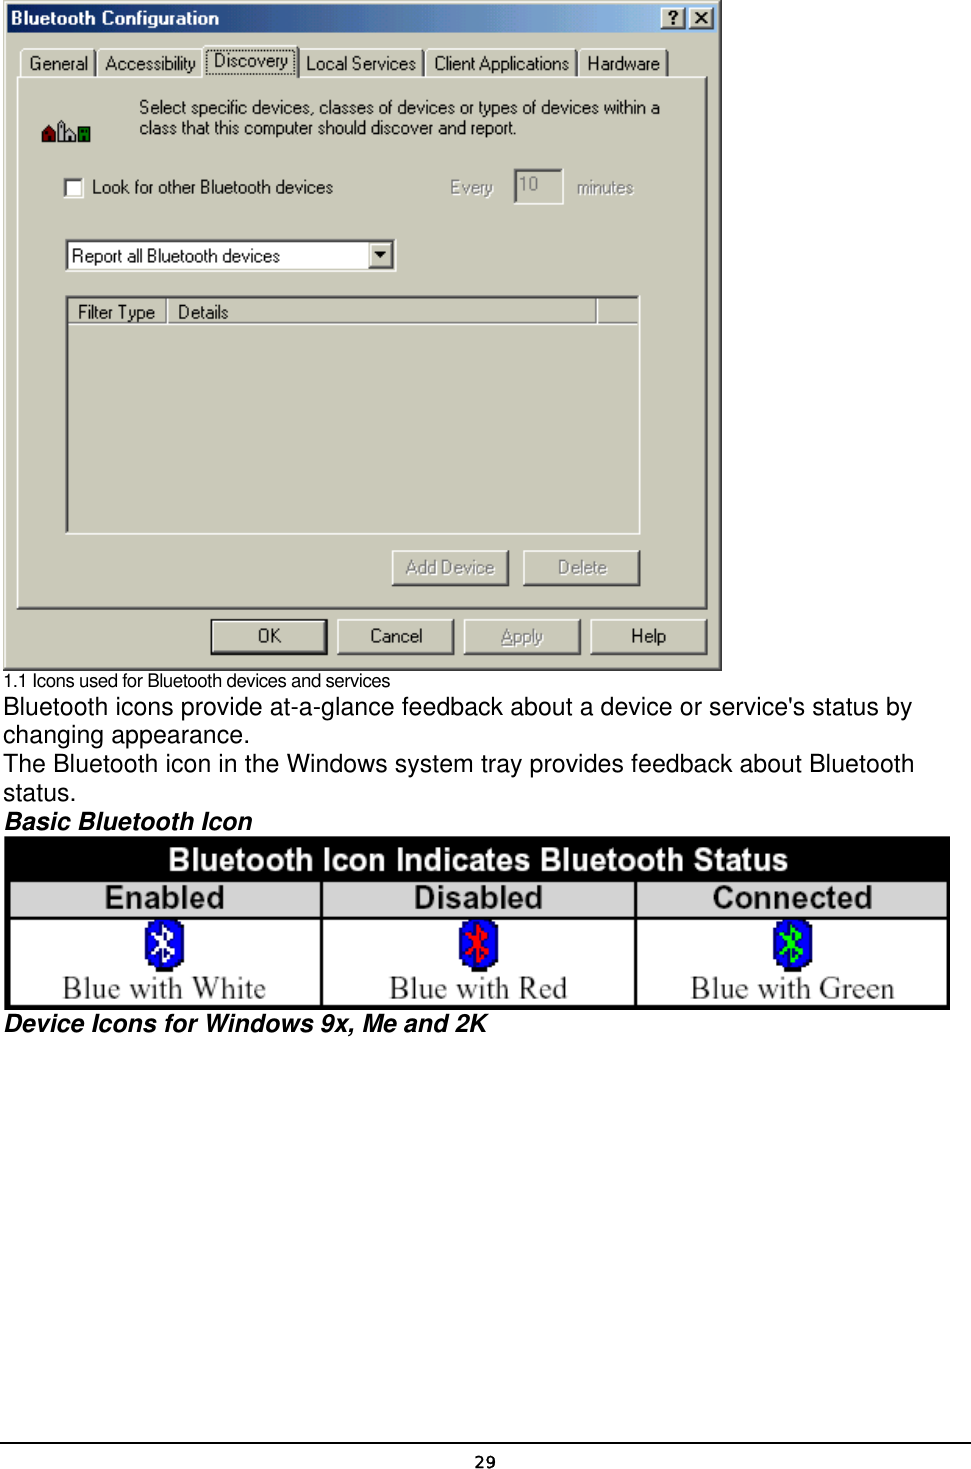   29 1.1 Icons used for Bluetooth devices and services  Bluetooth icons provide at-a-glance feedback about a device or service&apos;s status by changing appearance. The Bluetooth icon in the Windows system tray provides feedback about Bluetooth status. Basic Bluetooth Icon  Device Icons for Windows 9x, Me and 2K 